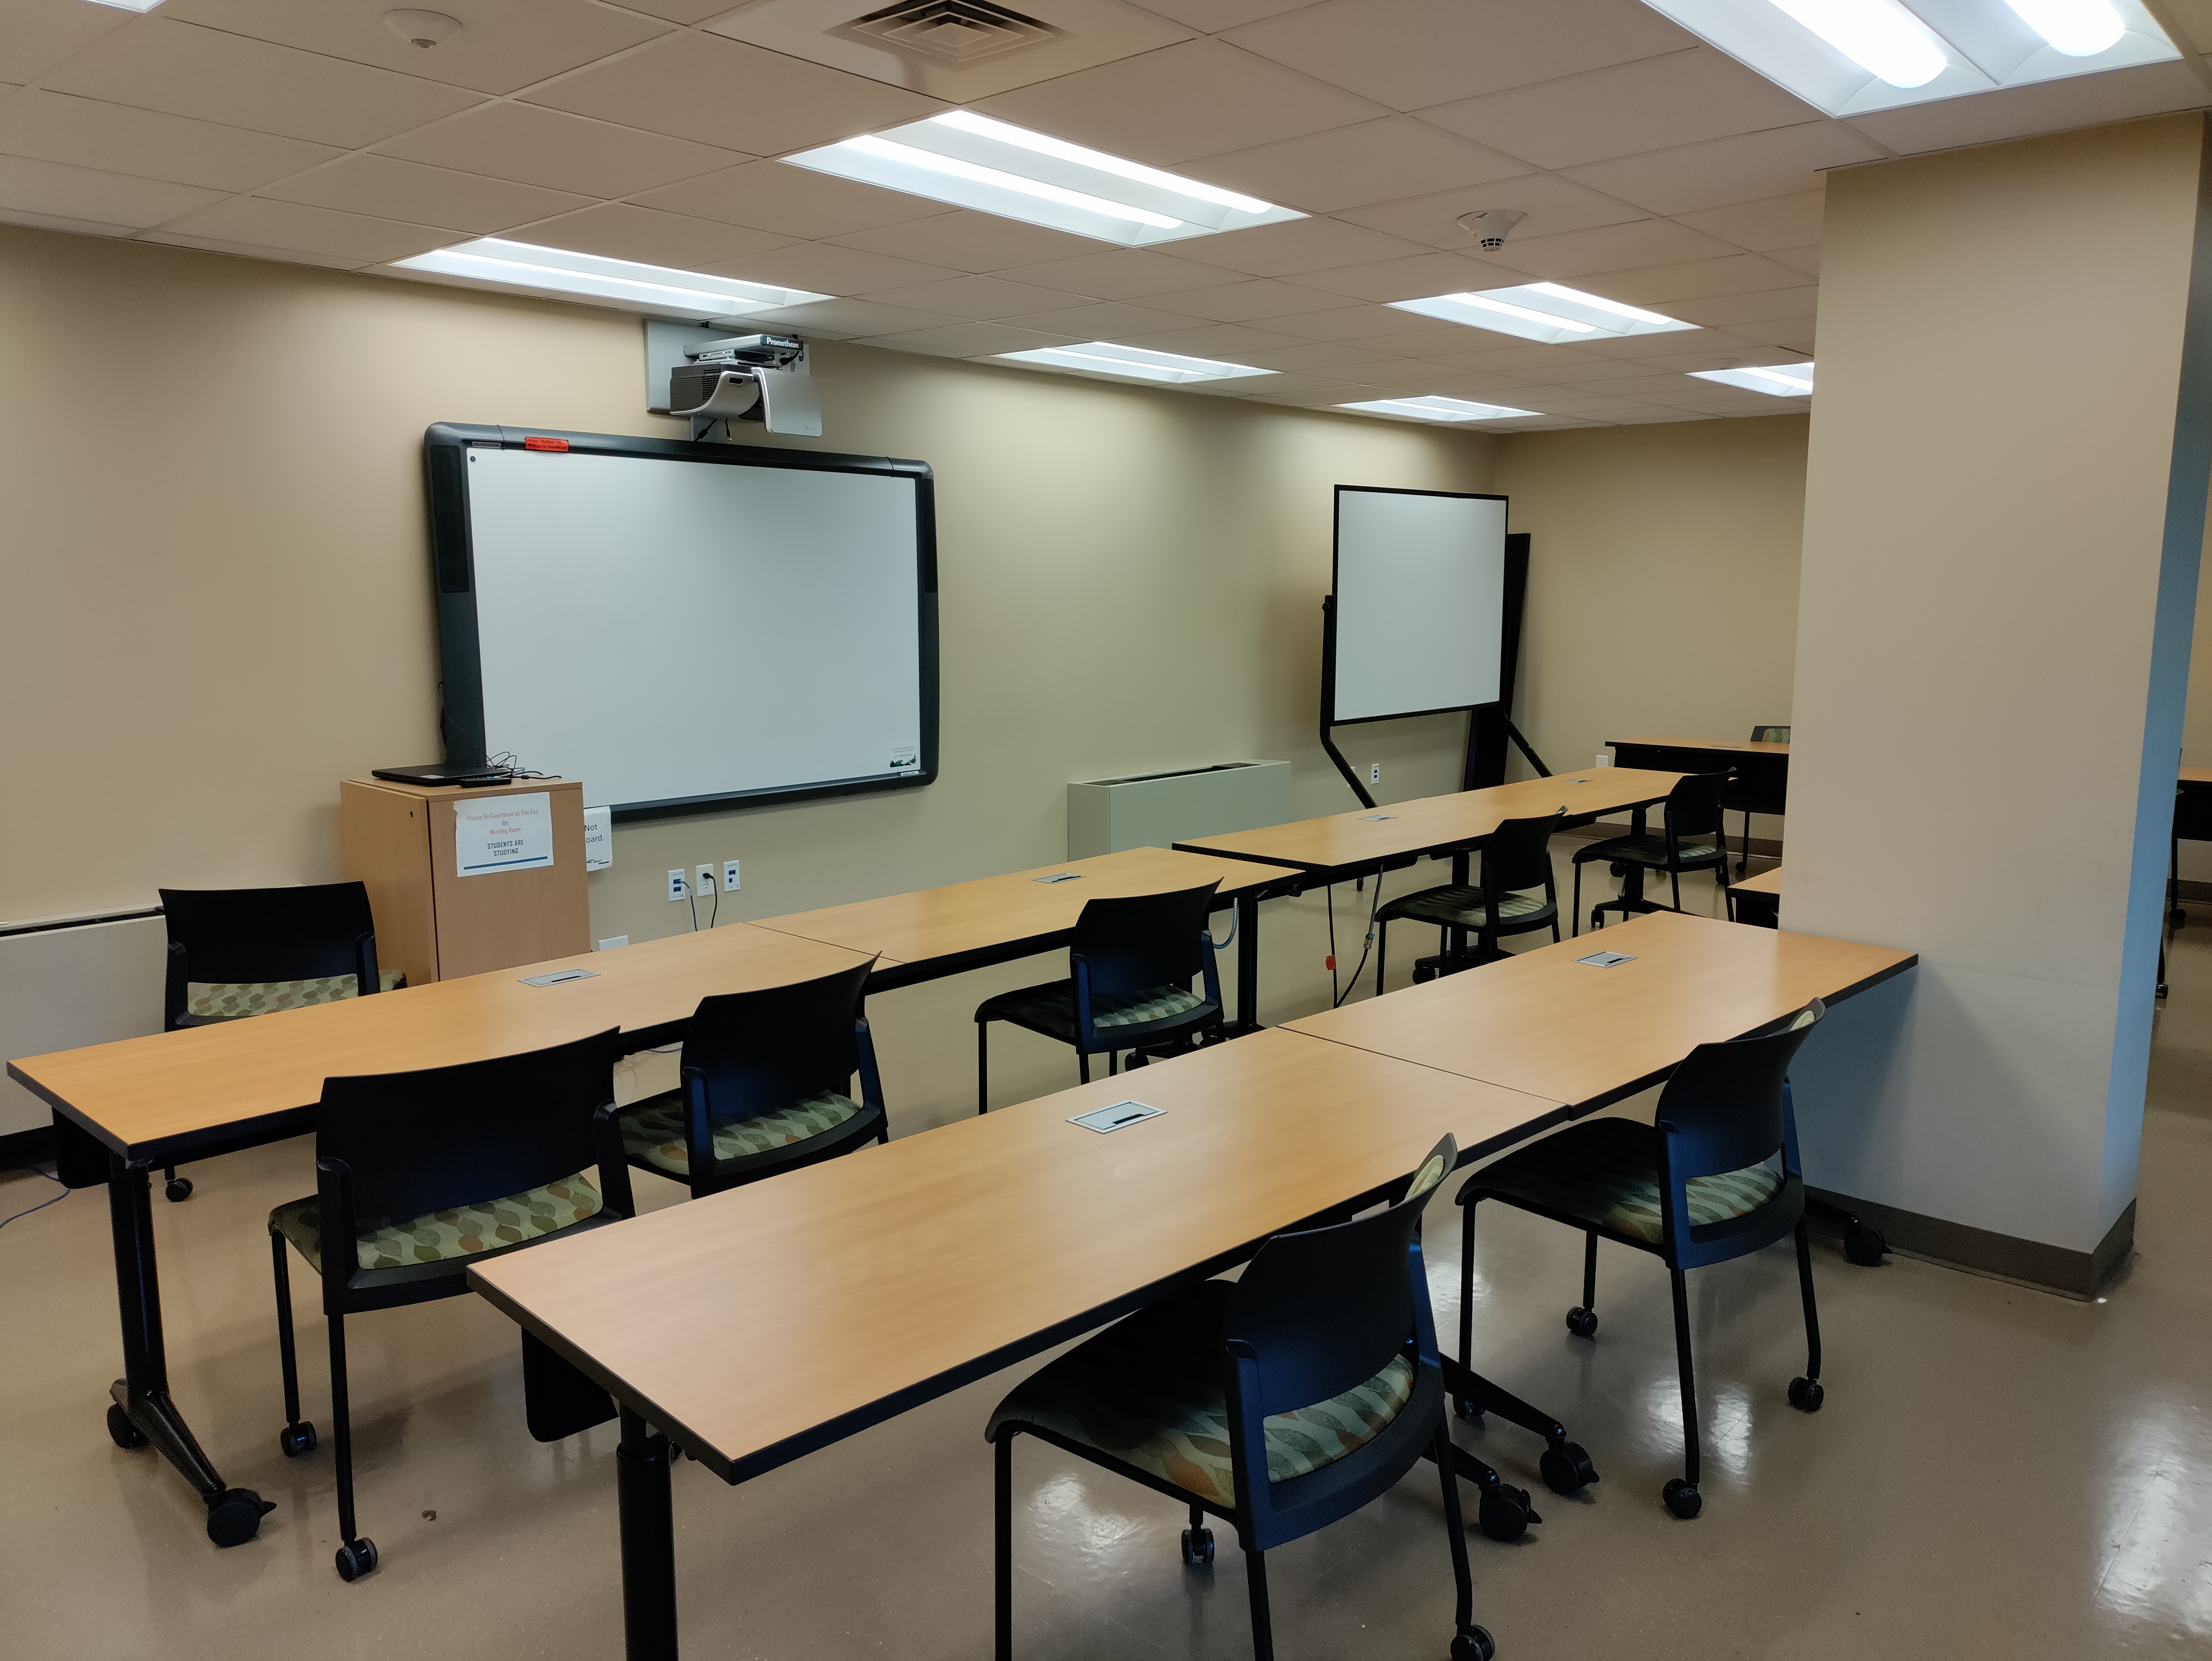 Multipurpose Room 104, the library's downstairs classroom. Chairs and tables face a projector screen and rolling whiteboard.